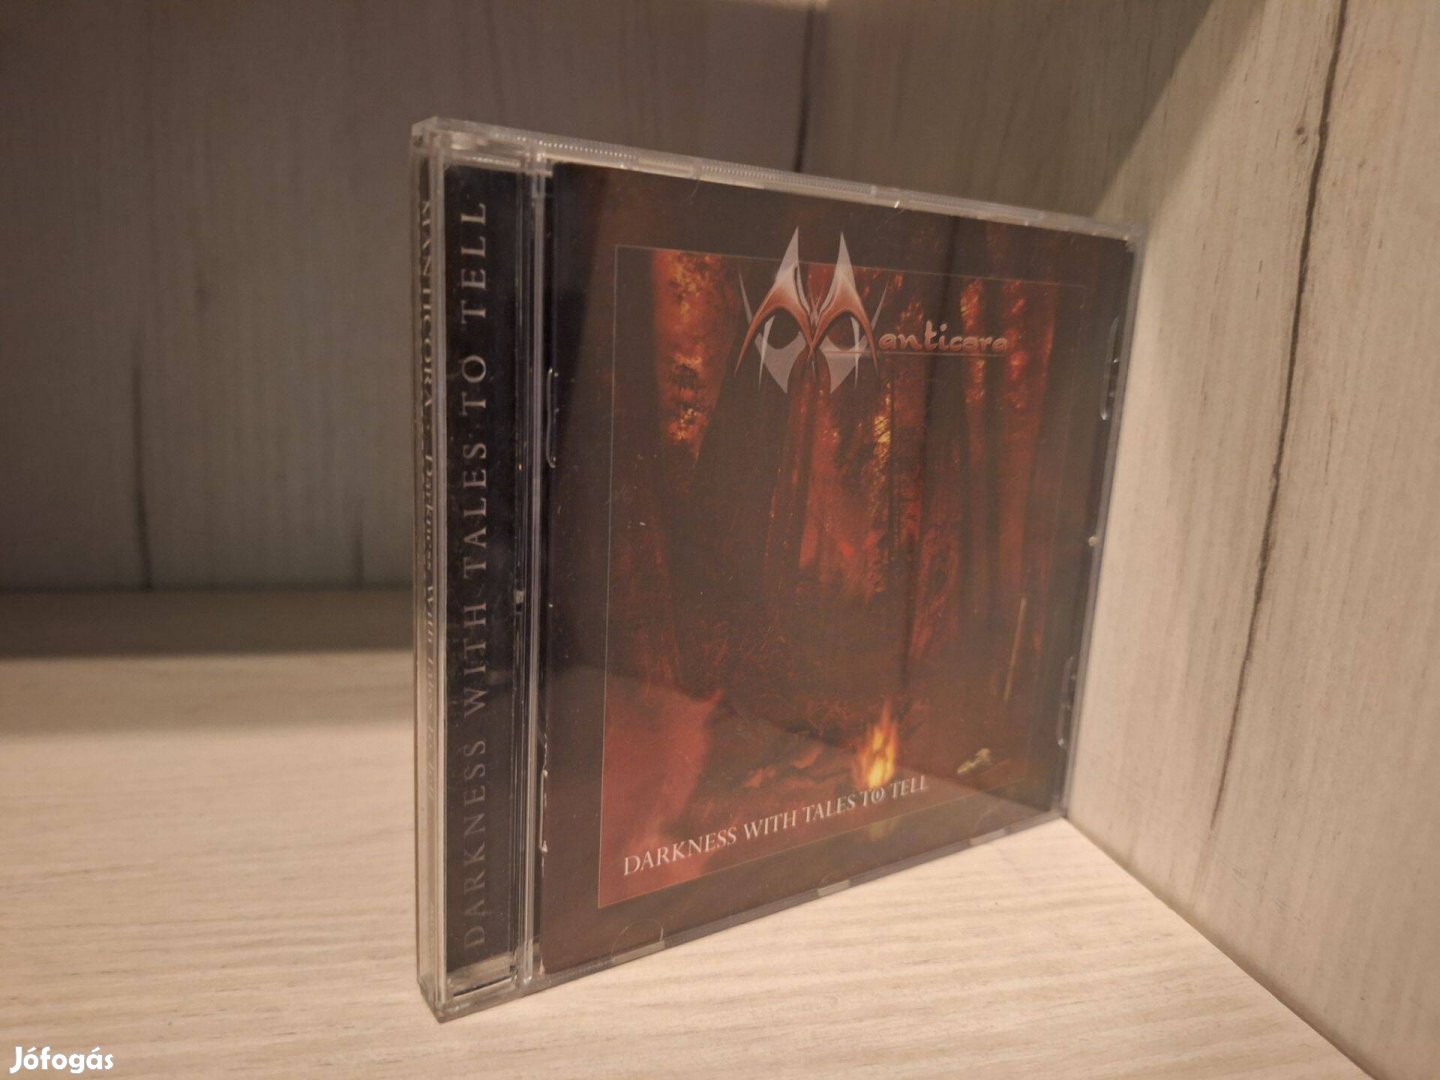 Manticora - Darkness With Tales To Tell CD